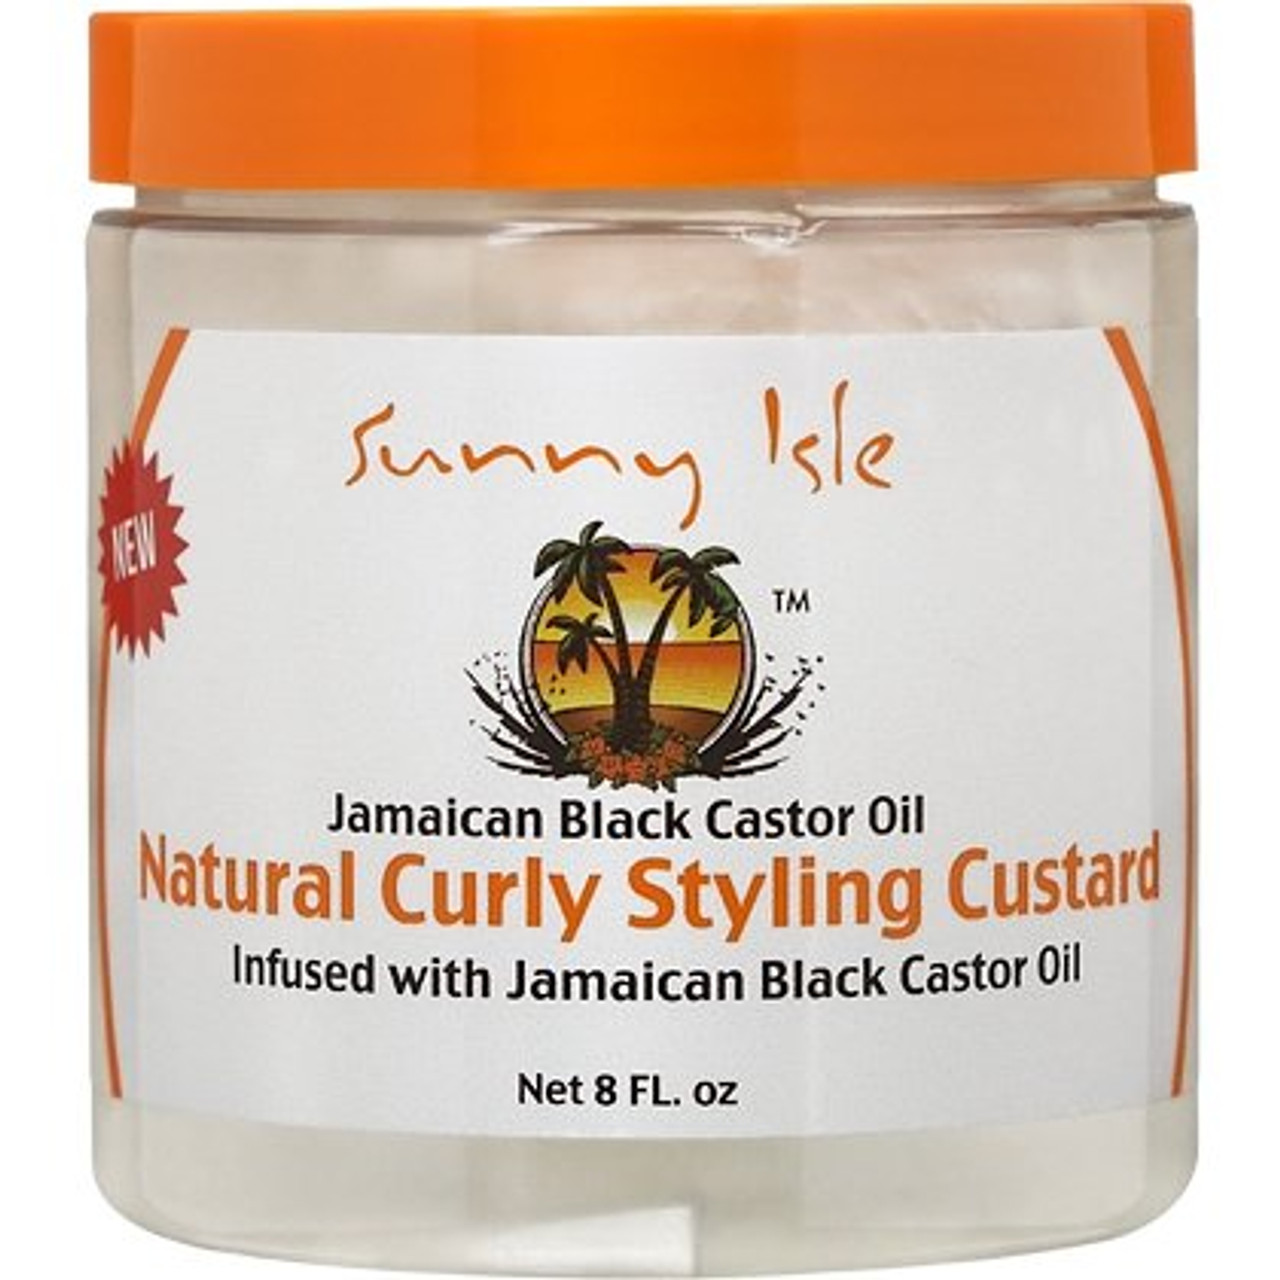 Sunny Isle Jamaican Black Castor Oil Natural Curly Styling Custard (8 oz.)  - NaturallyCurly